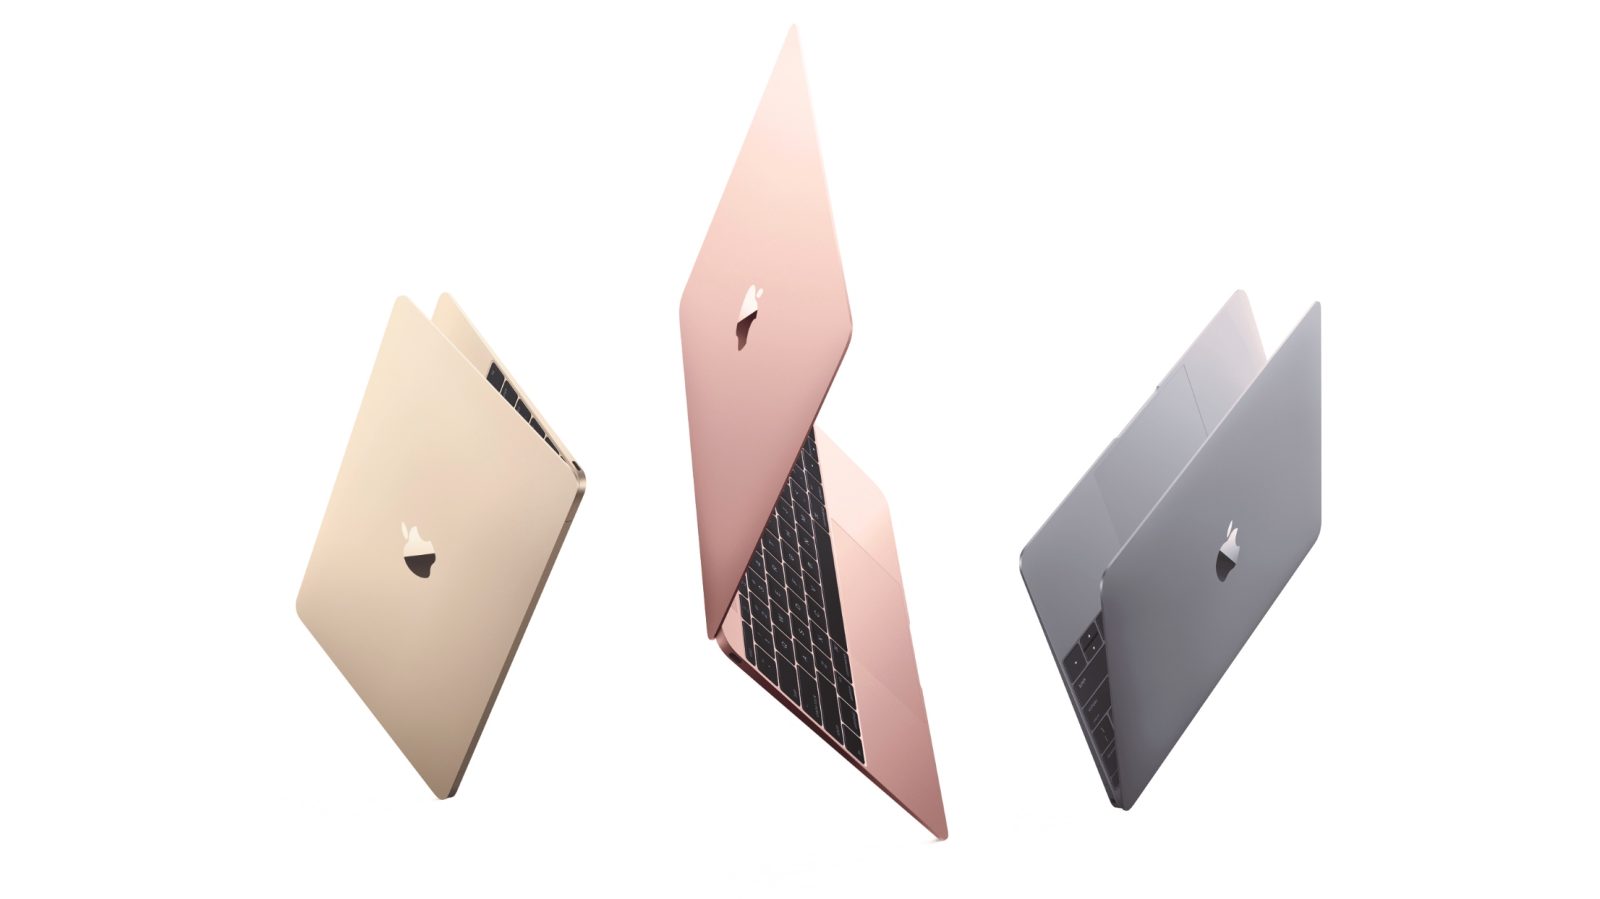 Apple releases new 12-inch Retina MacBook: new processors, rose gold,  better battery life - 9to5Mac